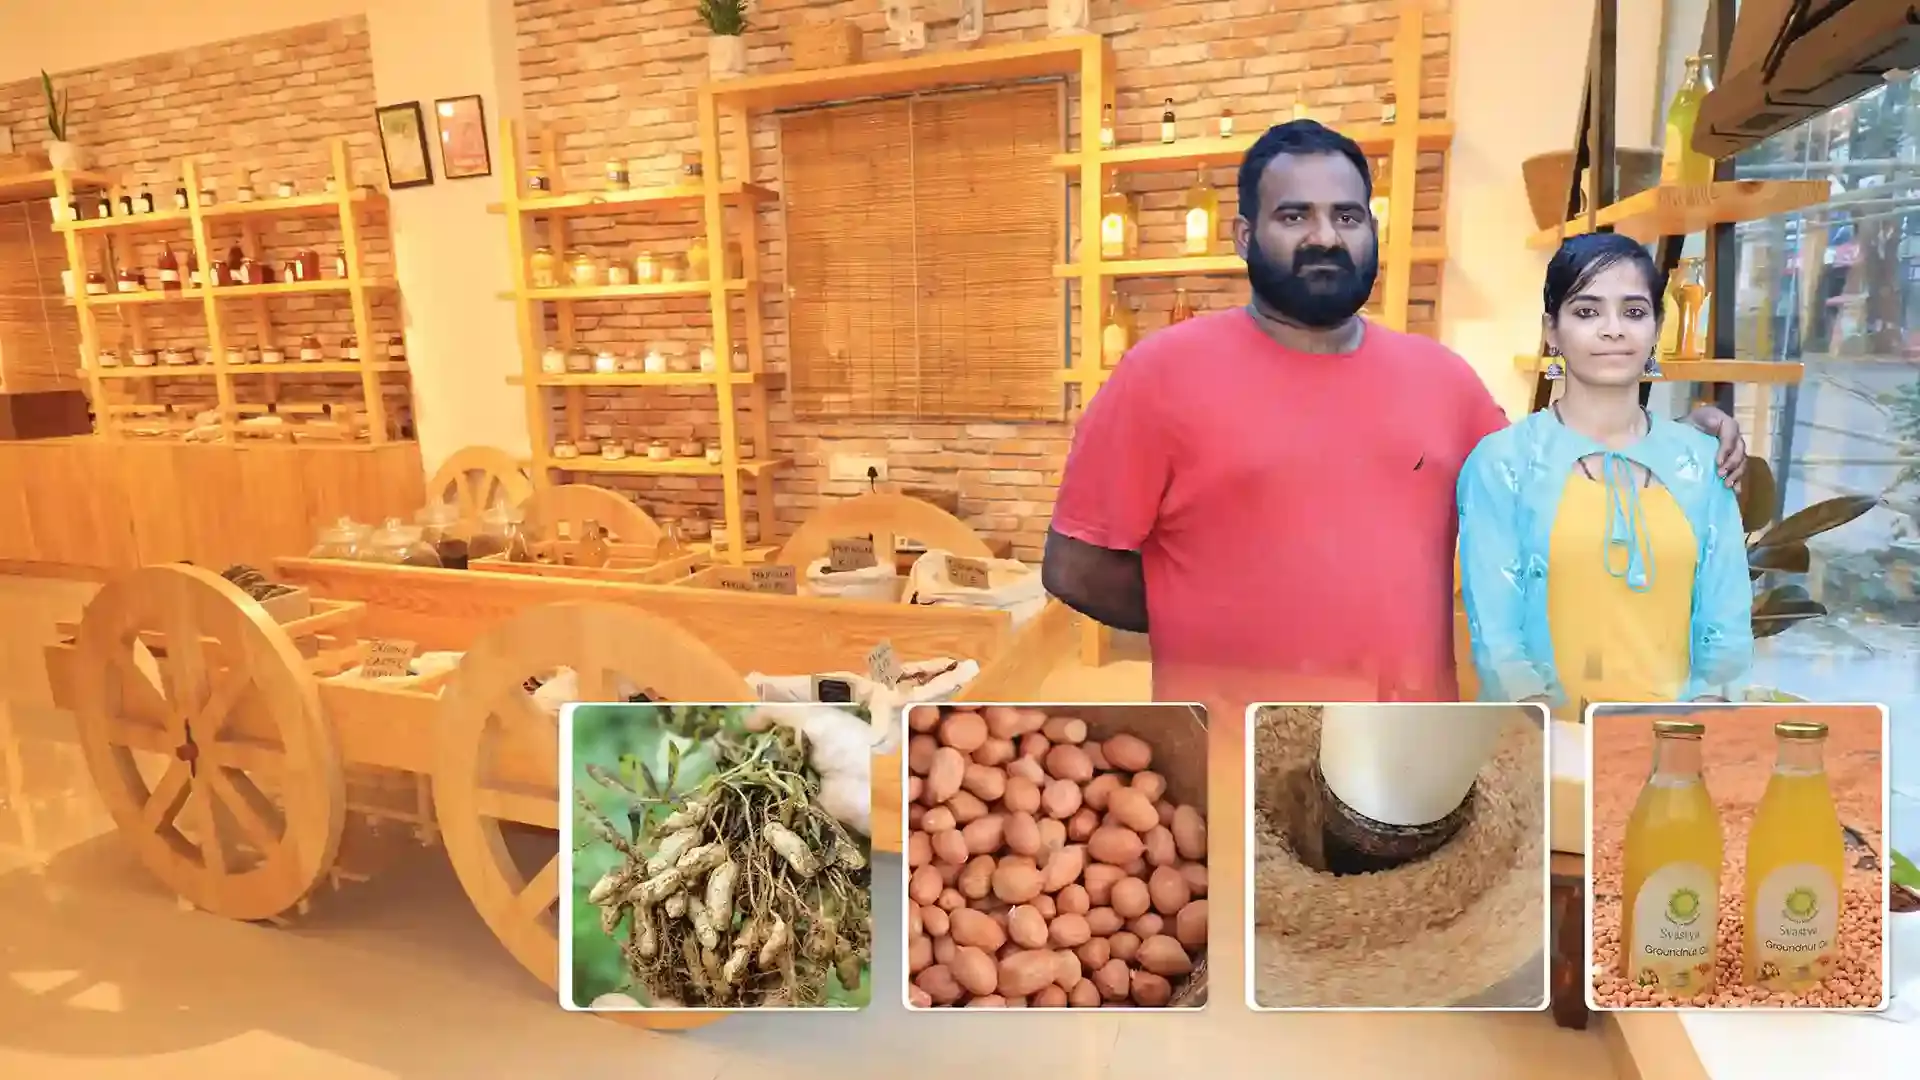 Course Trailer: Agripreneurship: Start a Successful Groundnut Oil Business. Watch to know more.